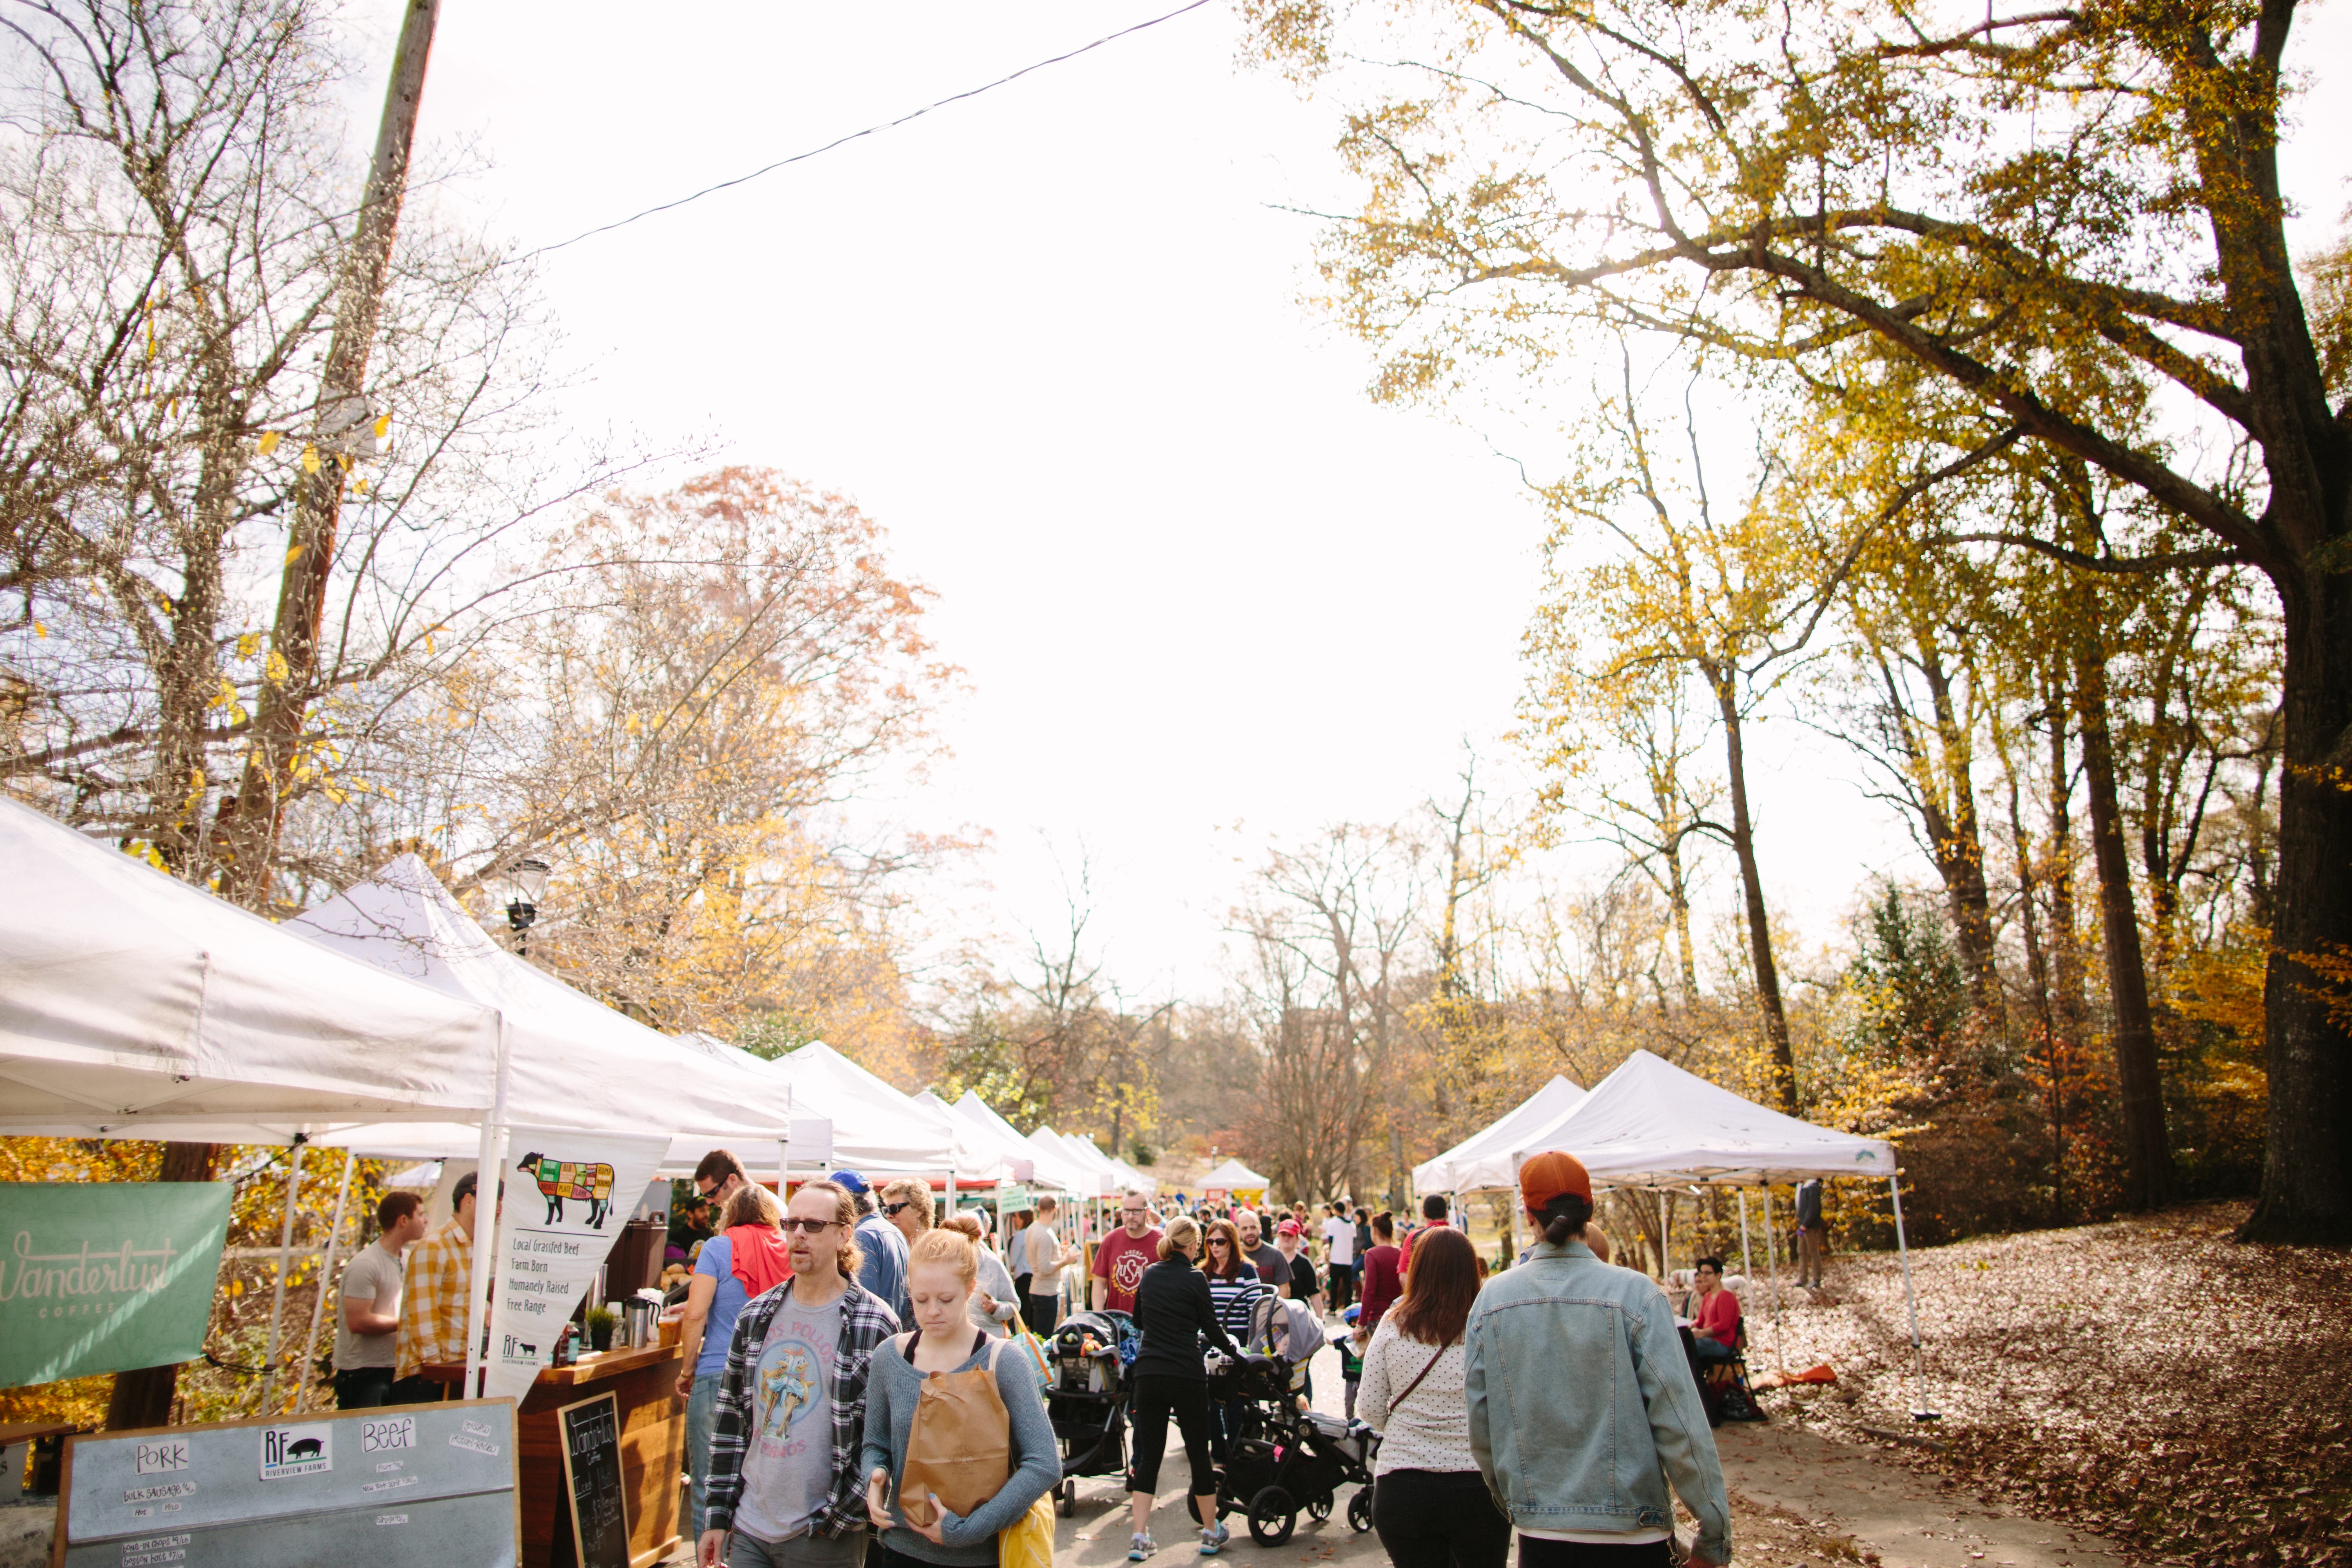 The Grant Park Farmers Market occurs every Sunday from 9:00am to 1:00pm. Photo Courtesy of Jenna Shea Mobley